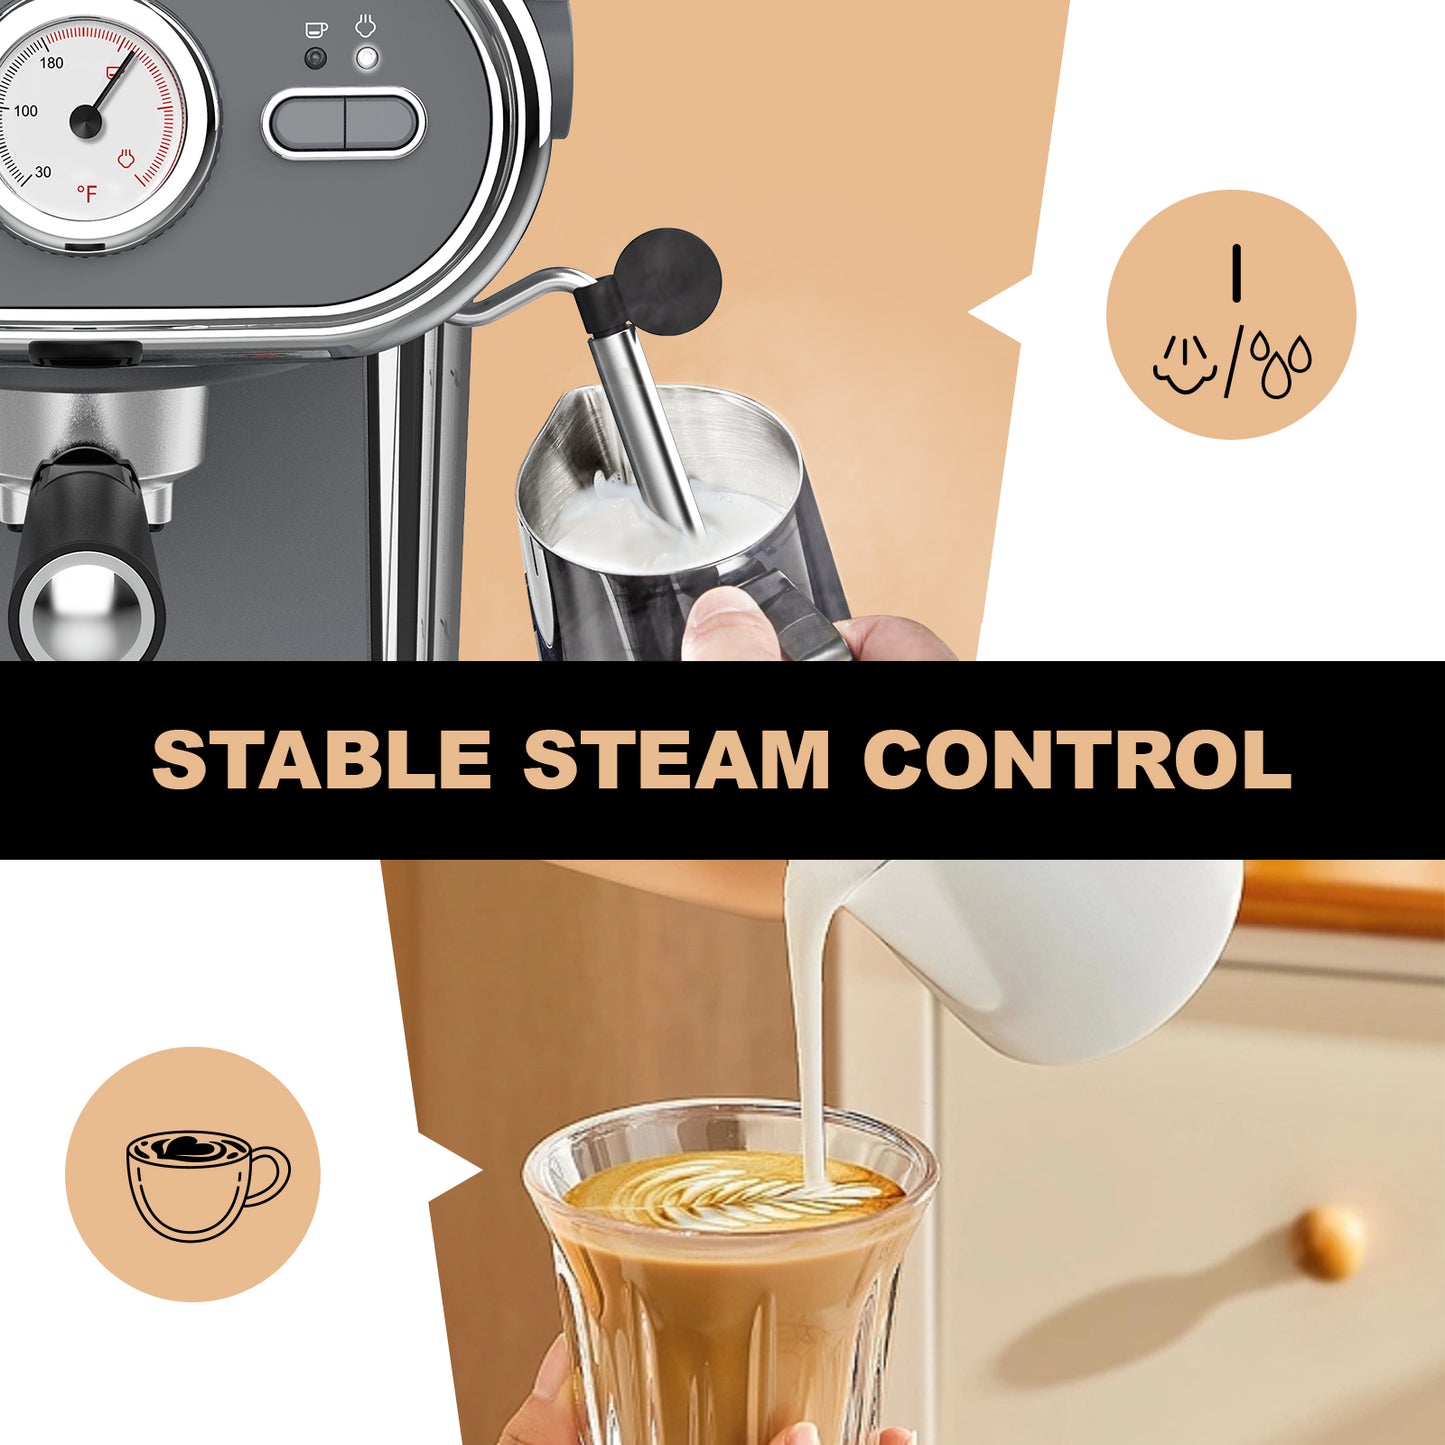 Laekerrt Espresso Machine with Visible Thermometer, 20 Bar Pump Pressure Home Coffee Machine with Milk Frother Steam Wand, 1100W Cappuccino Latte Coffee Maker, with 2 Stainless Steel Filter Cups